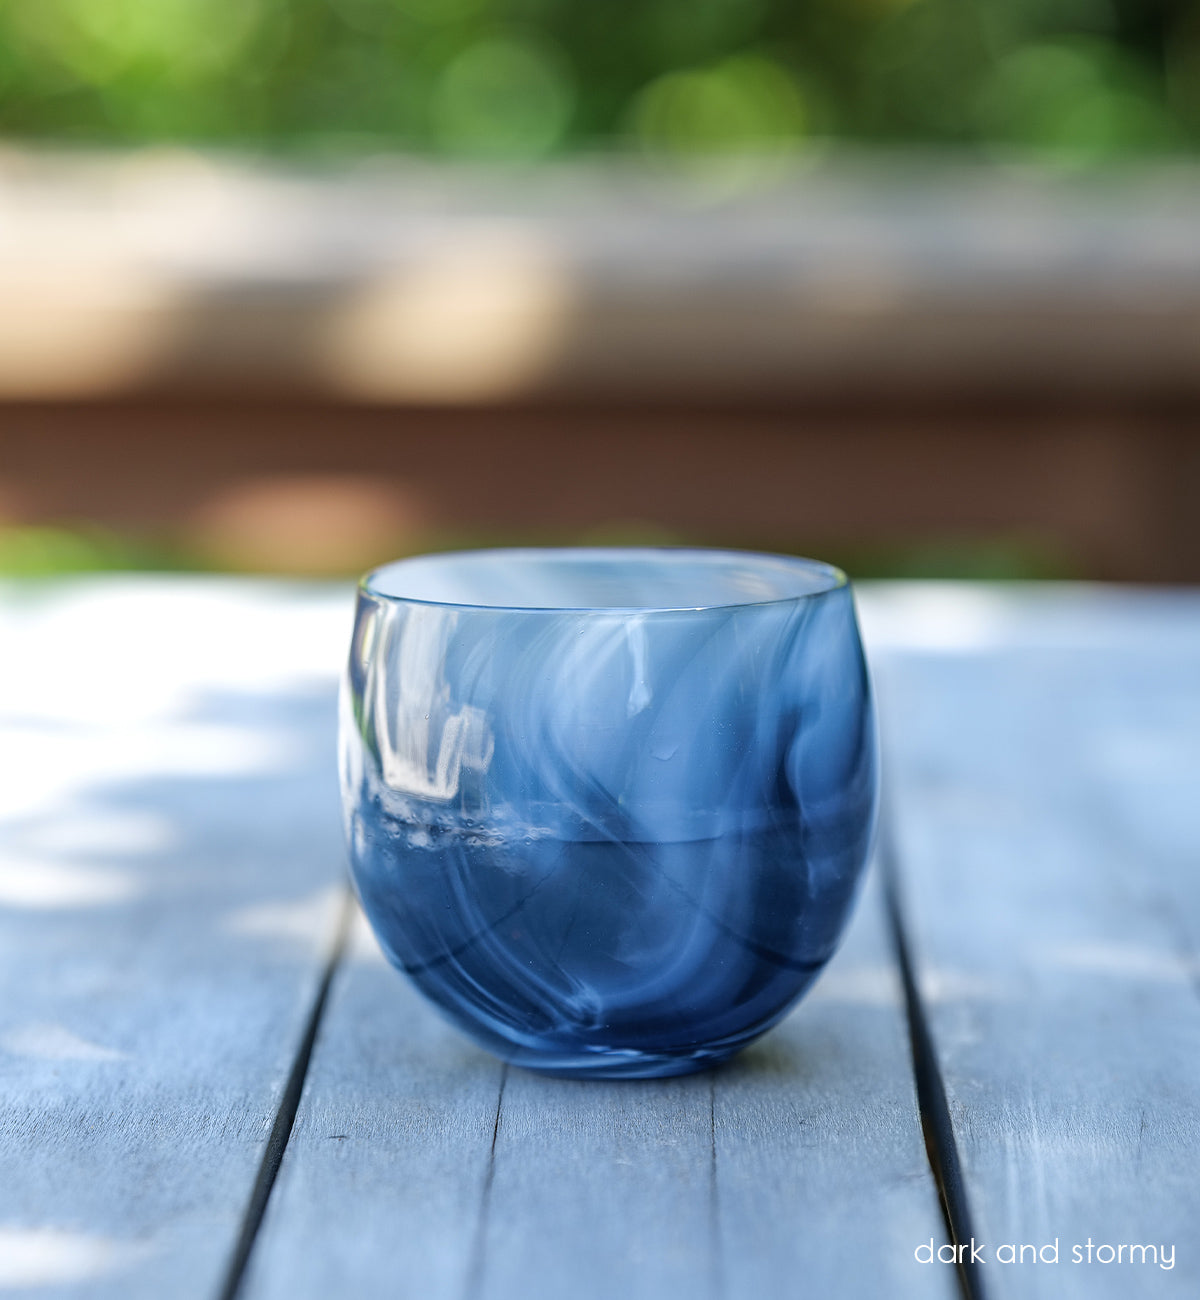 dark and stormy deep blue and white swirled together, to create this one-of-a-kind hand-blown drinking glass.